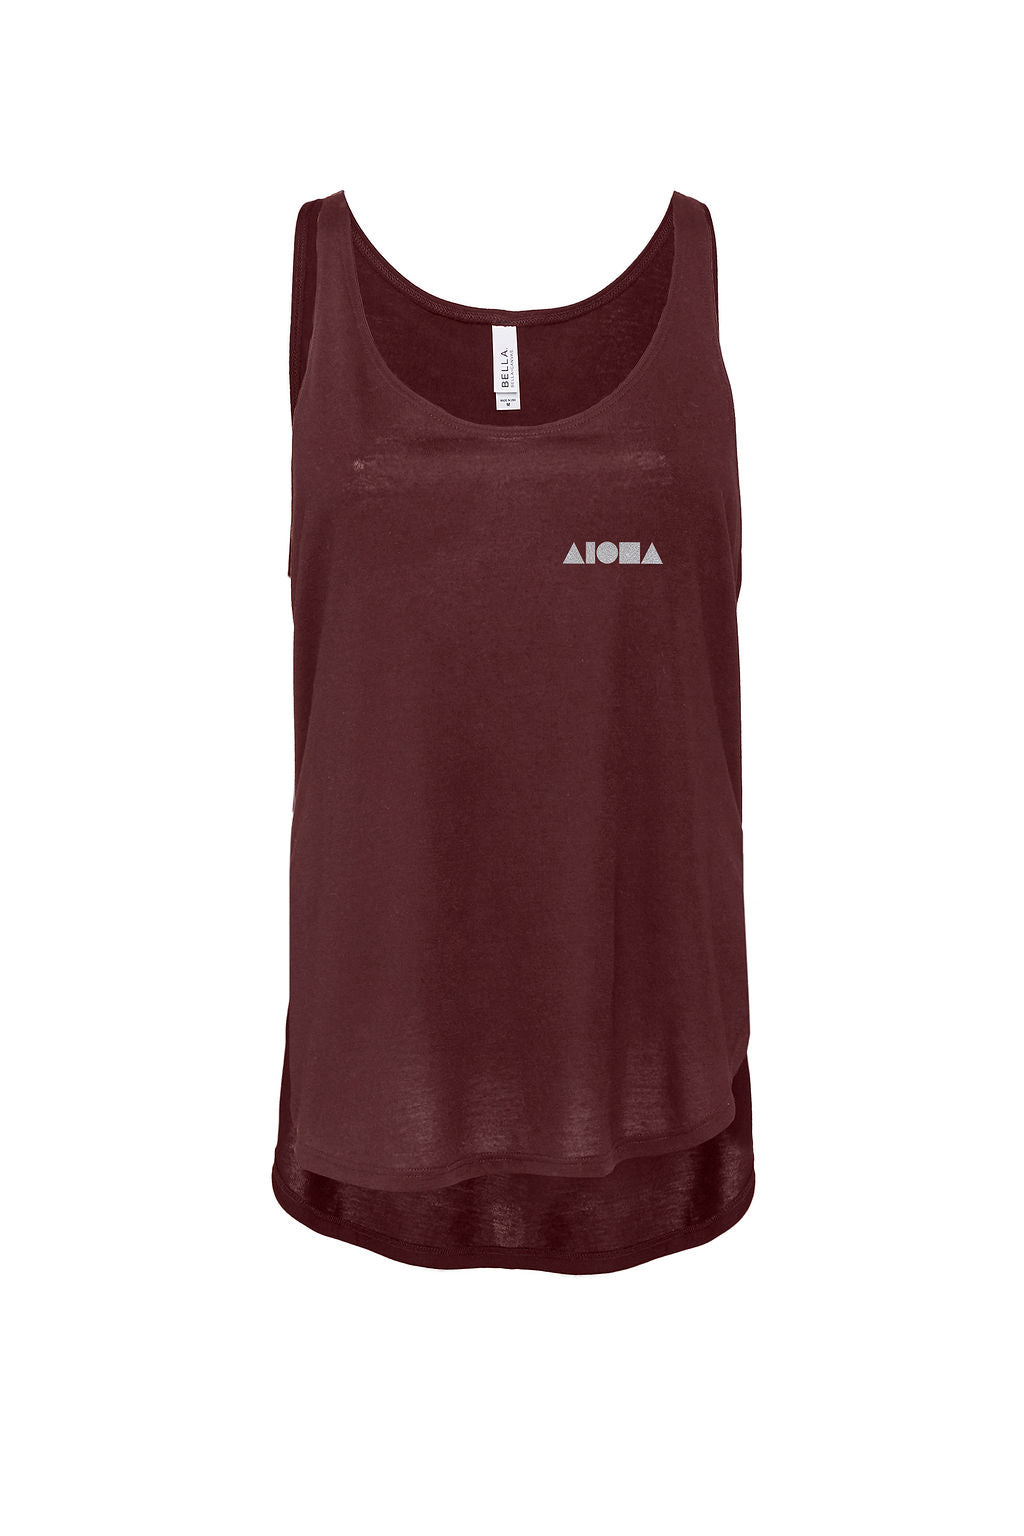 Womens flowy side slit tank with scoop neck. Maroon fabric printed with small silver aloha Shapes logo on front left chest